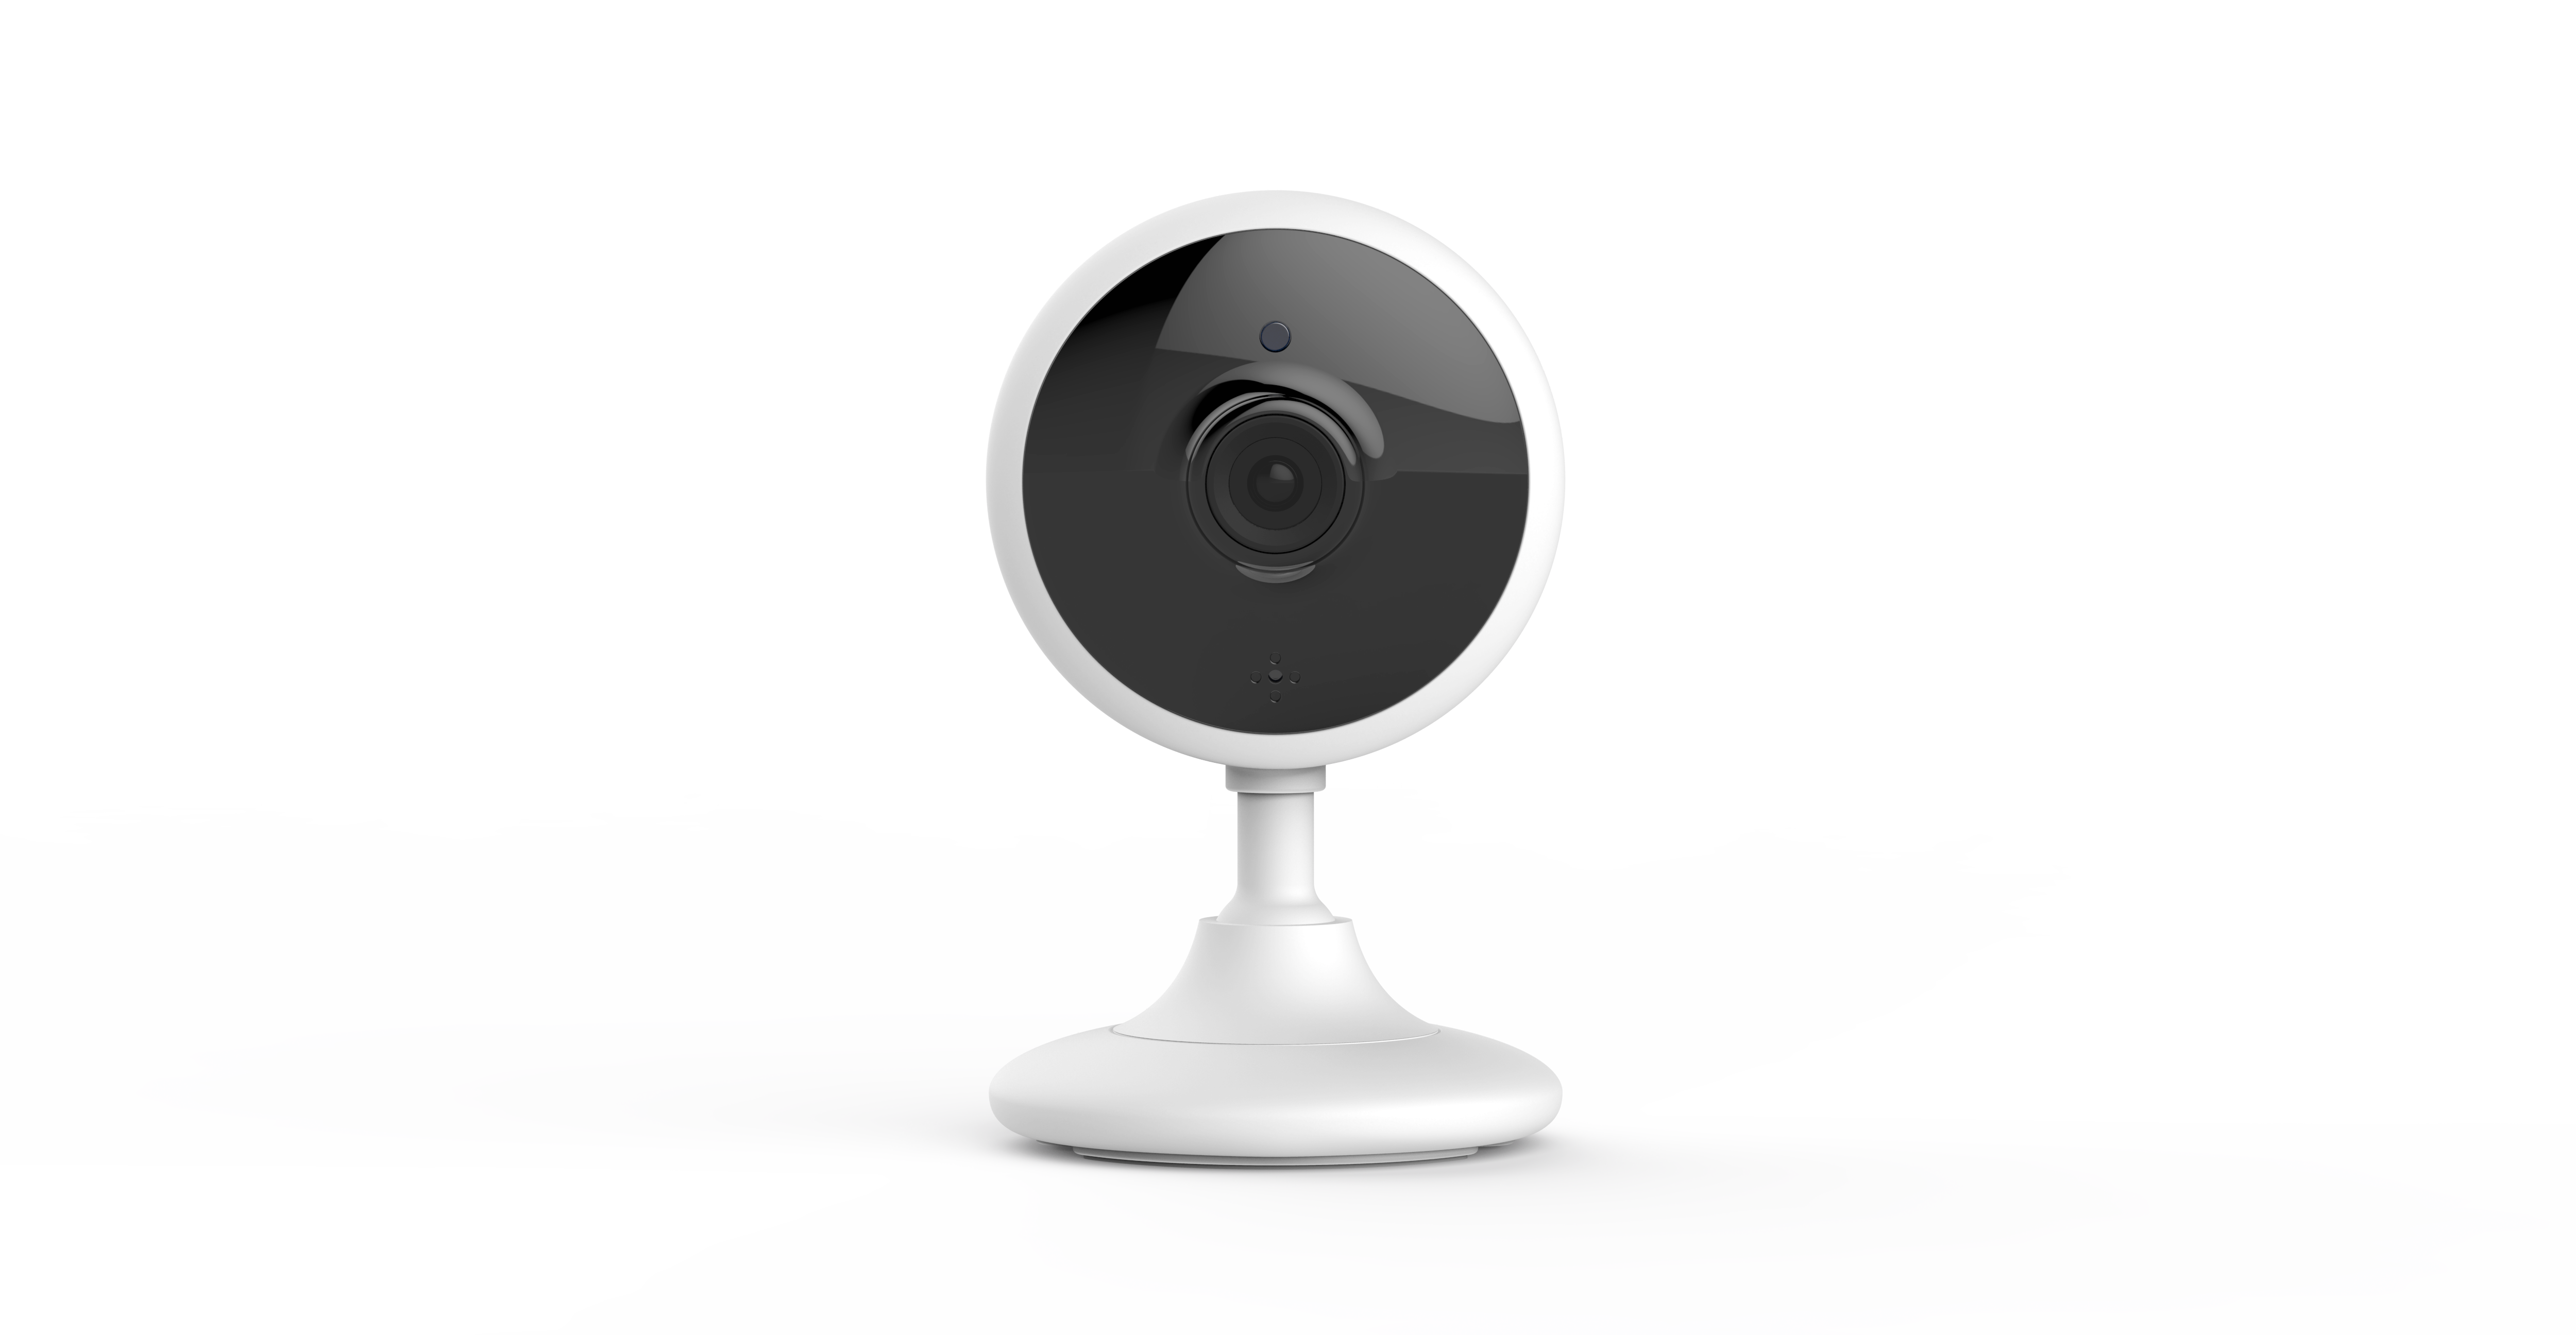 Suitable for living room surveillance camera